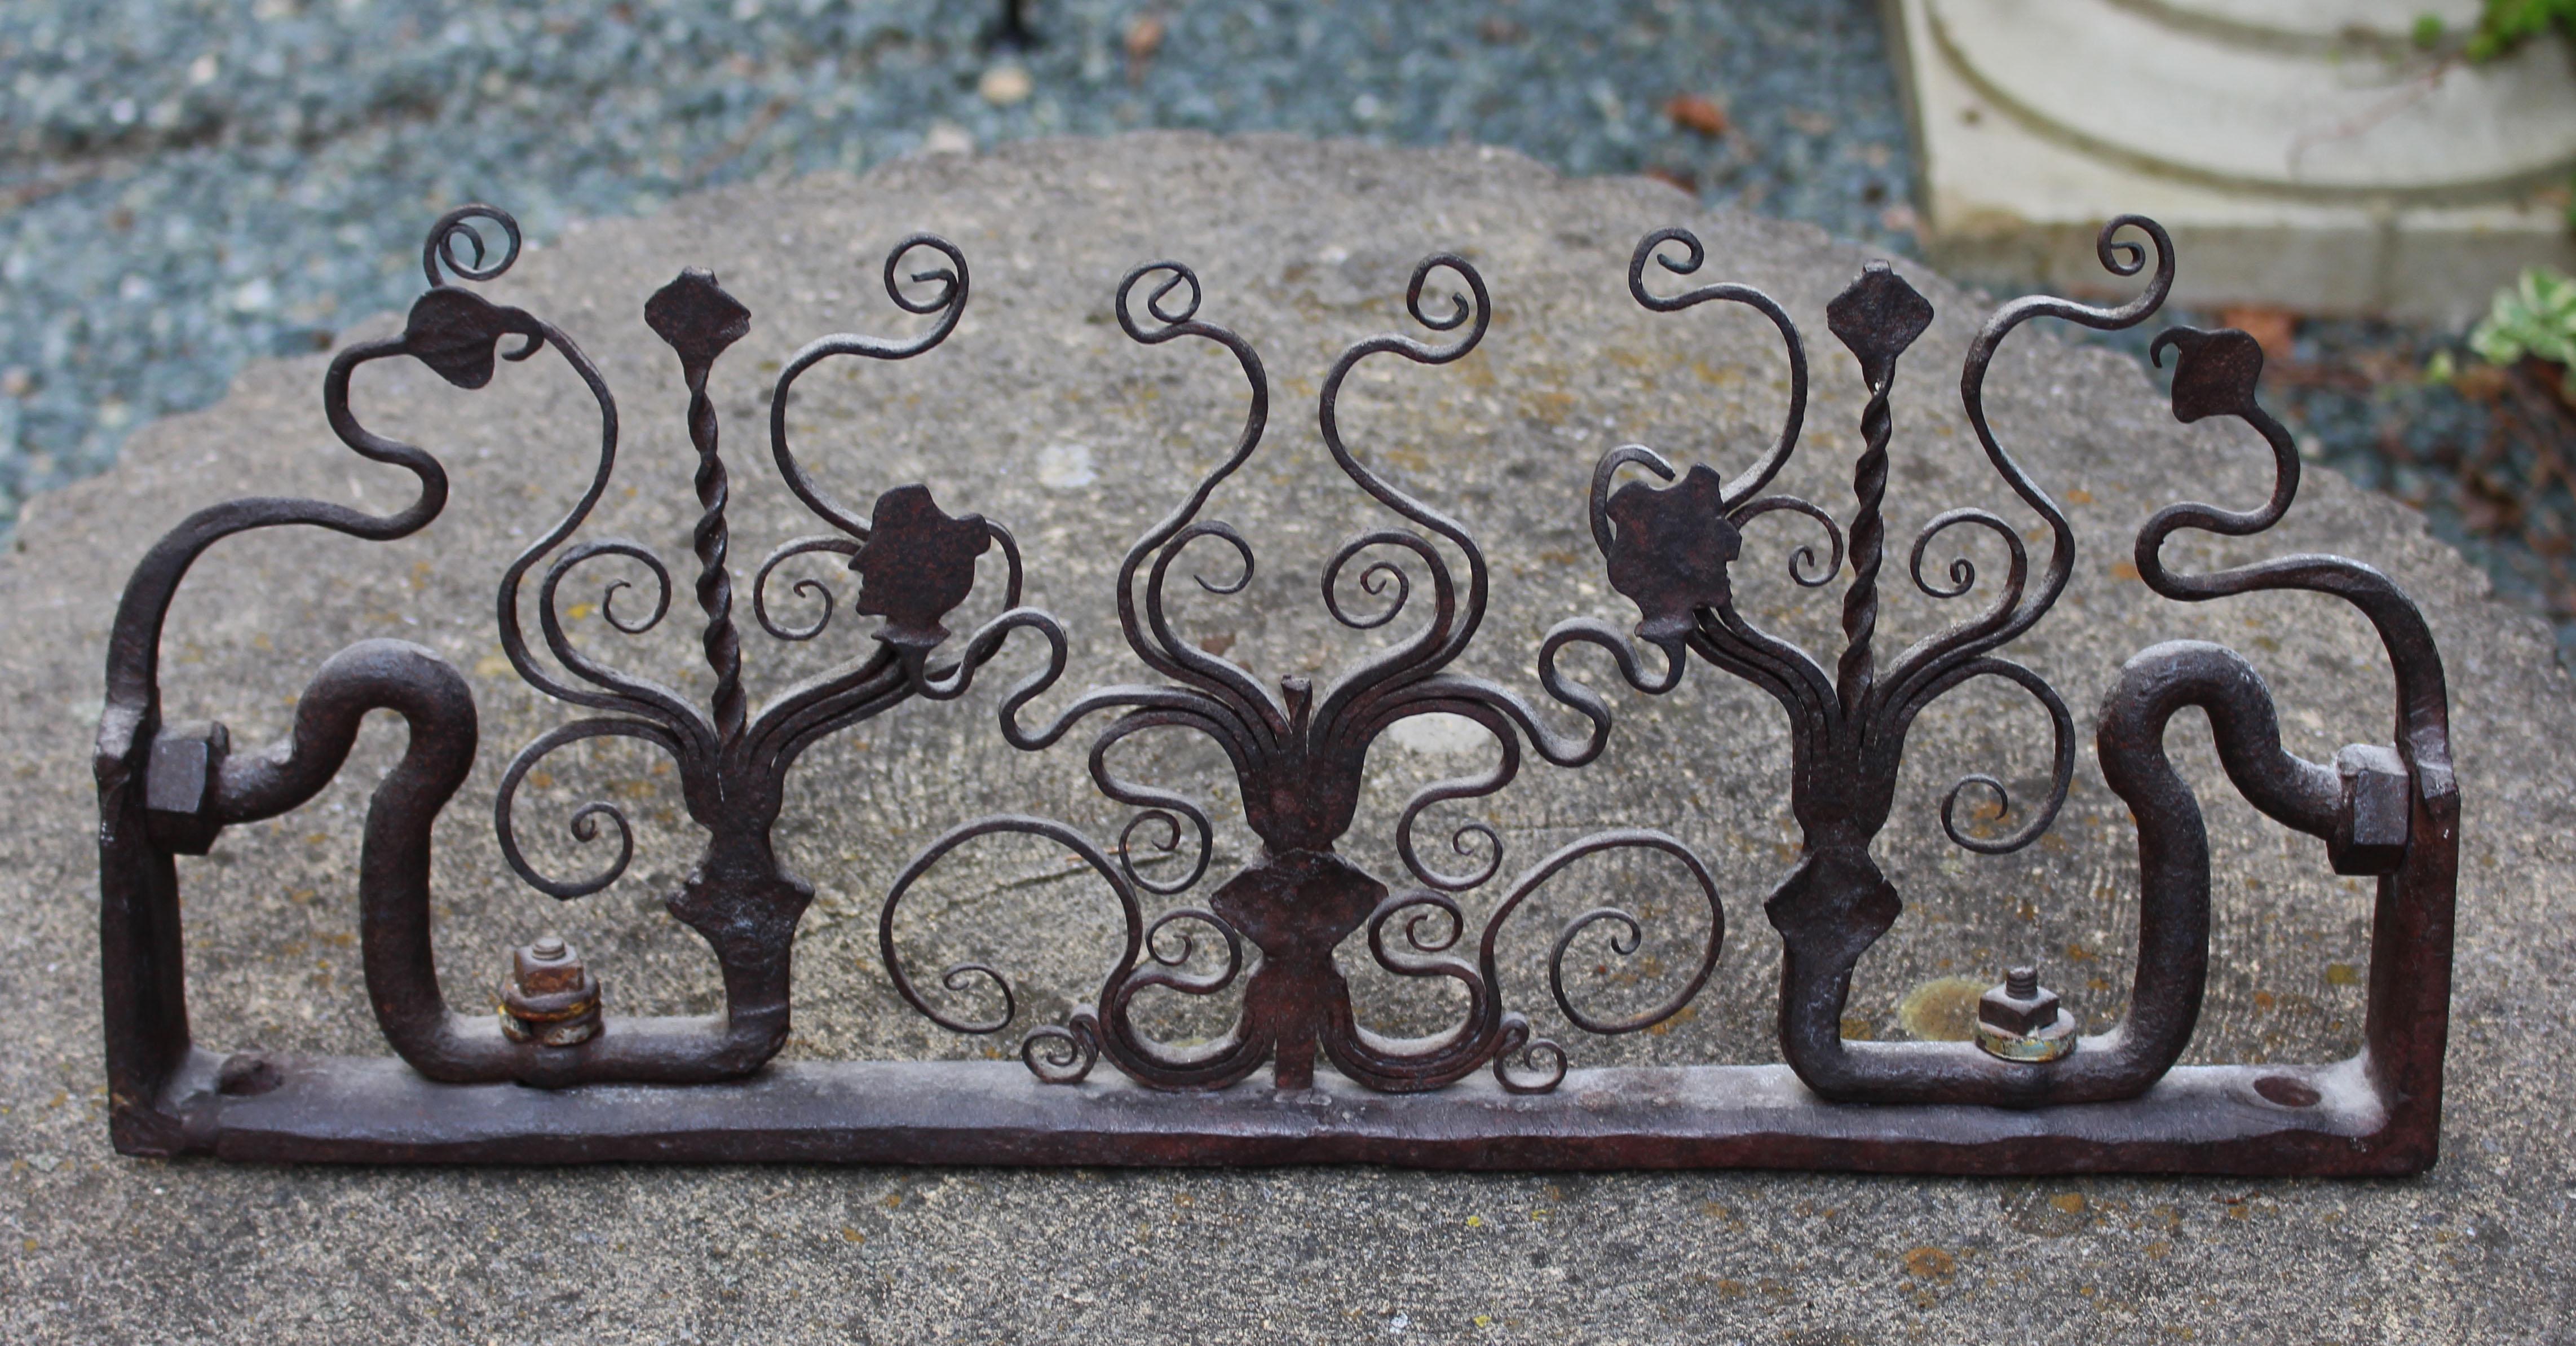 19th century wrought iron fence fragment, Continental likely Portuguese. Decorated with scrolls & 2 opposing classical busts. Fun in front of a fireplace, kitchen backsplash or accent decoration. Estate of Jean Anderson, noted cookbook author. 21